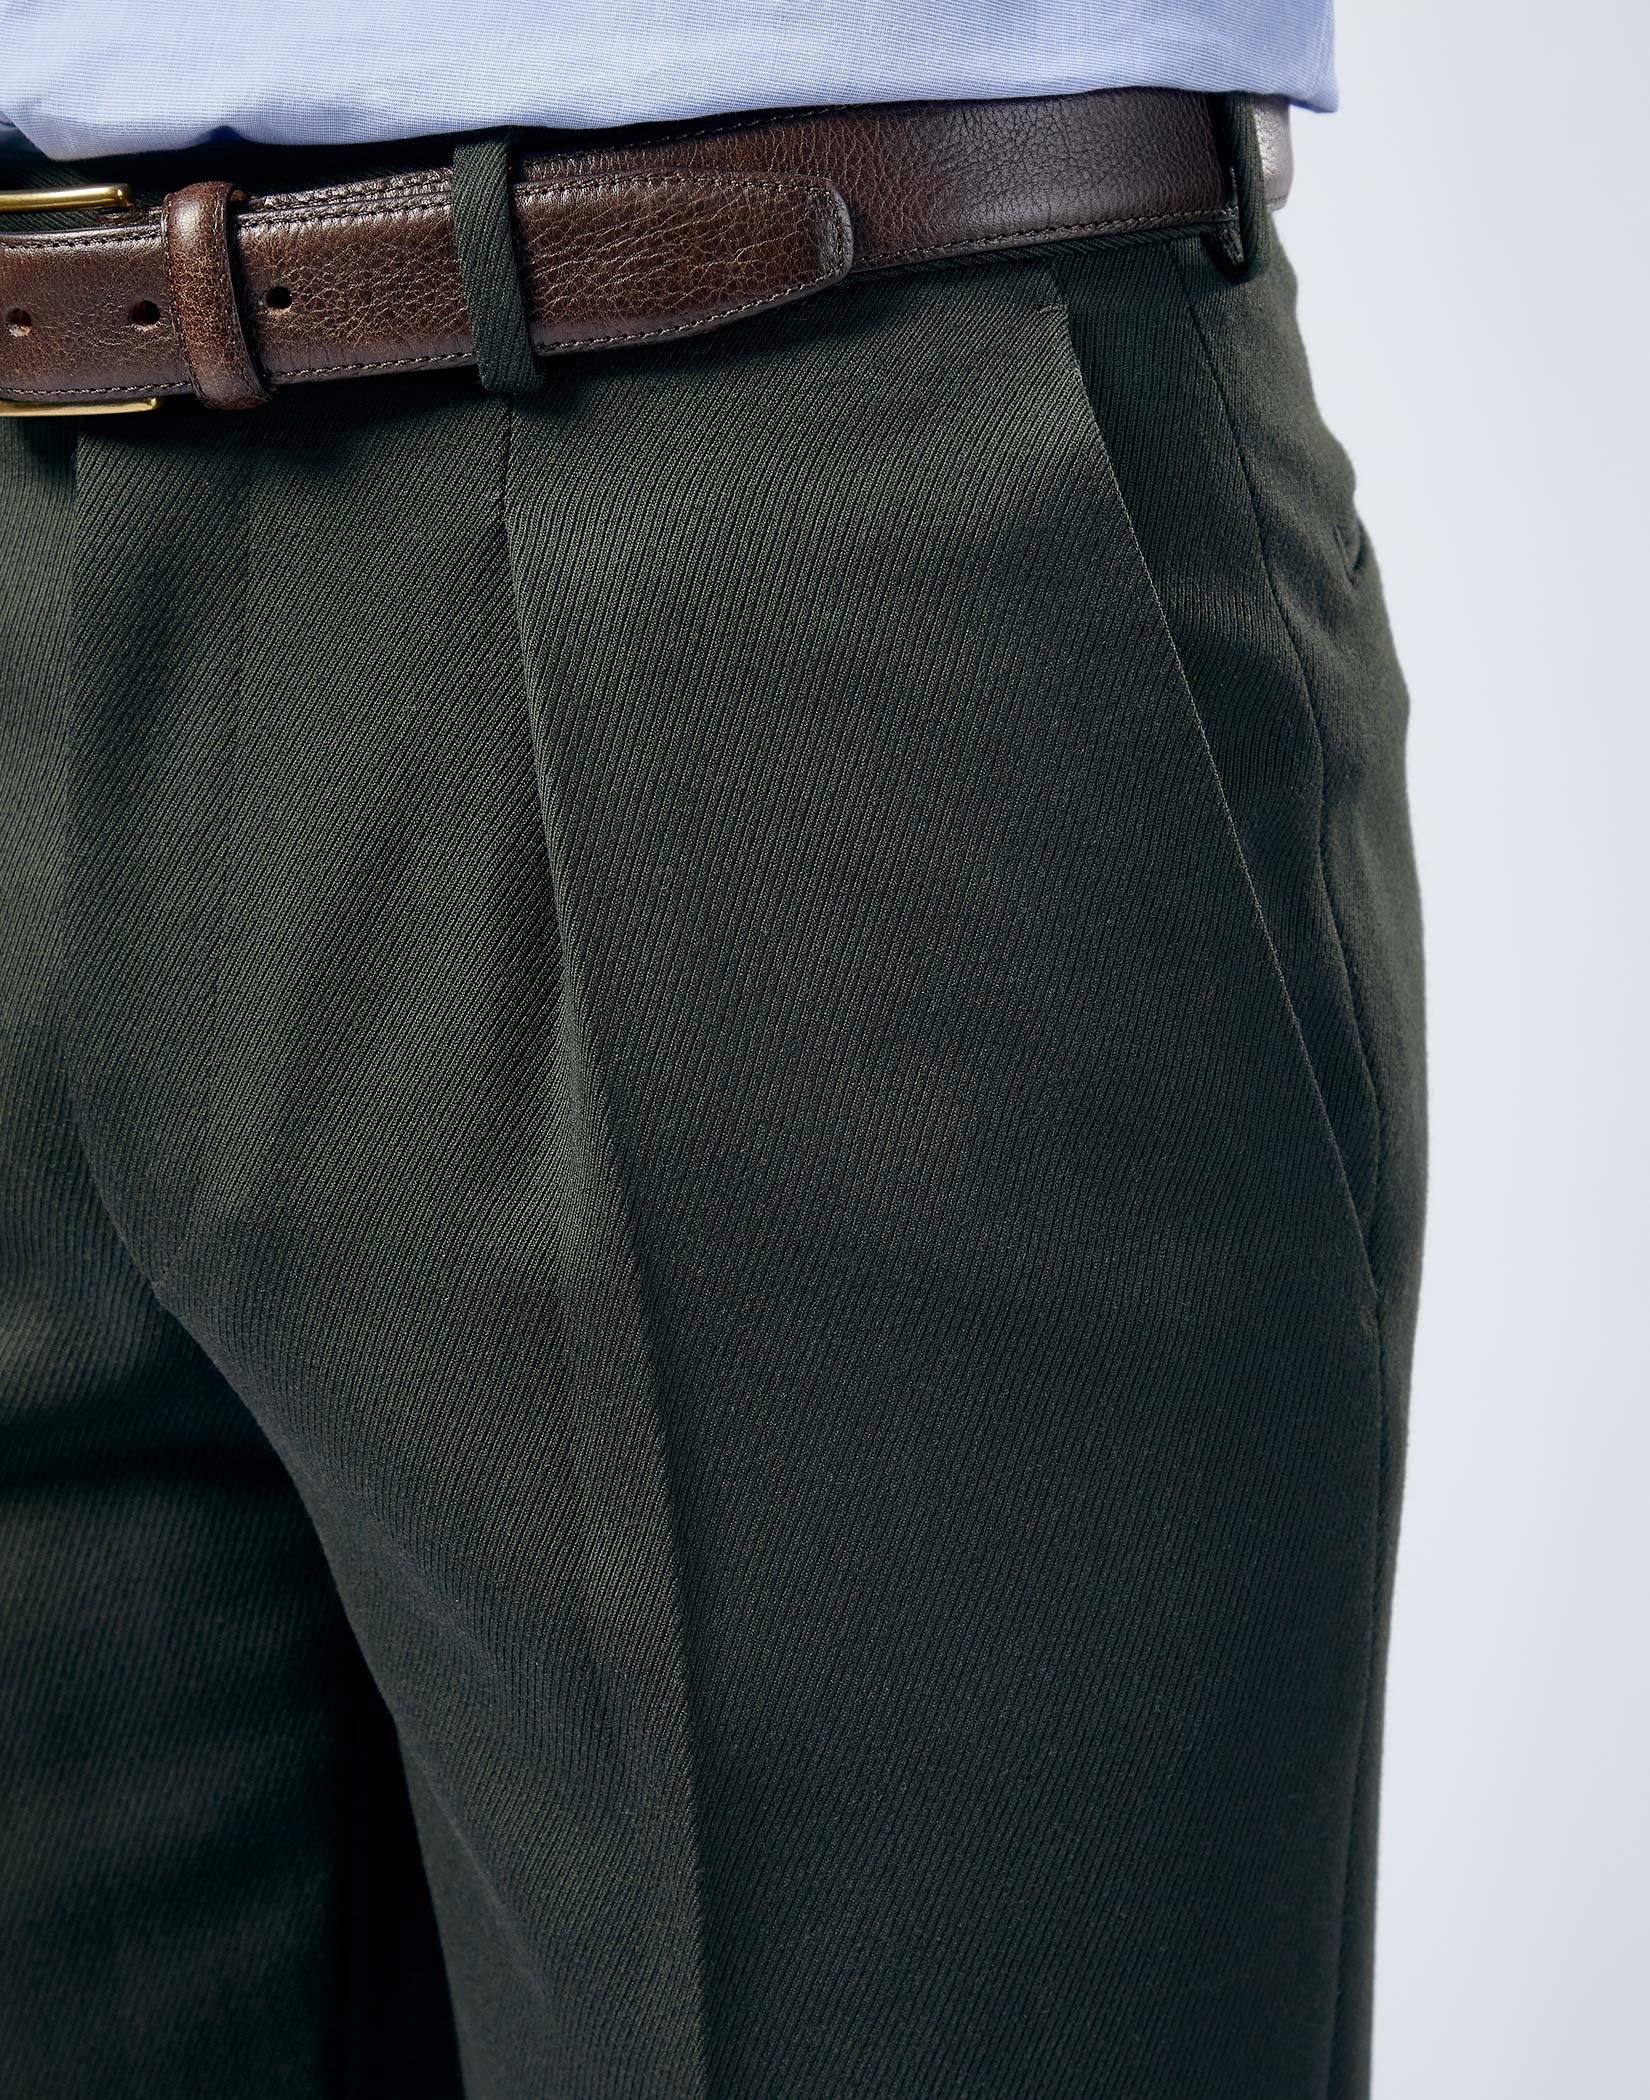 Mens Cavalry Twill Pants  Peter Christian